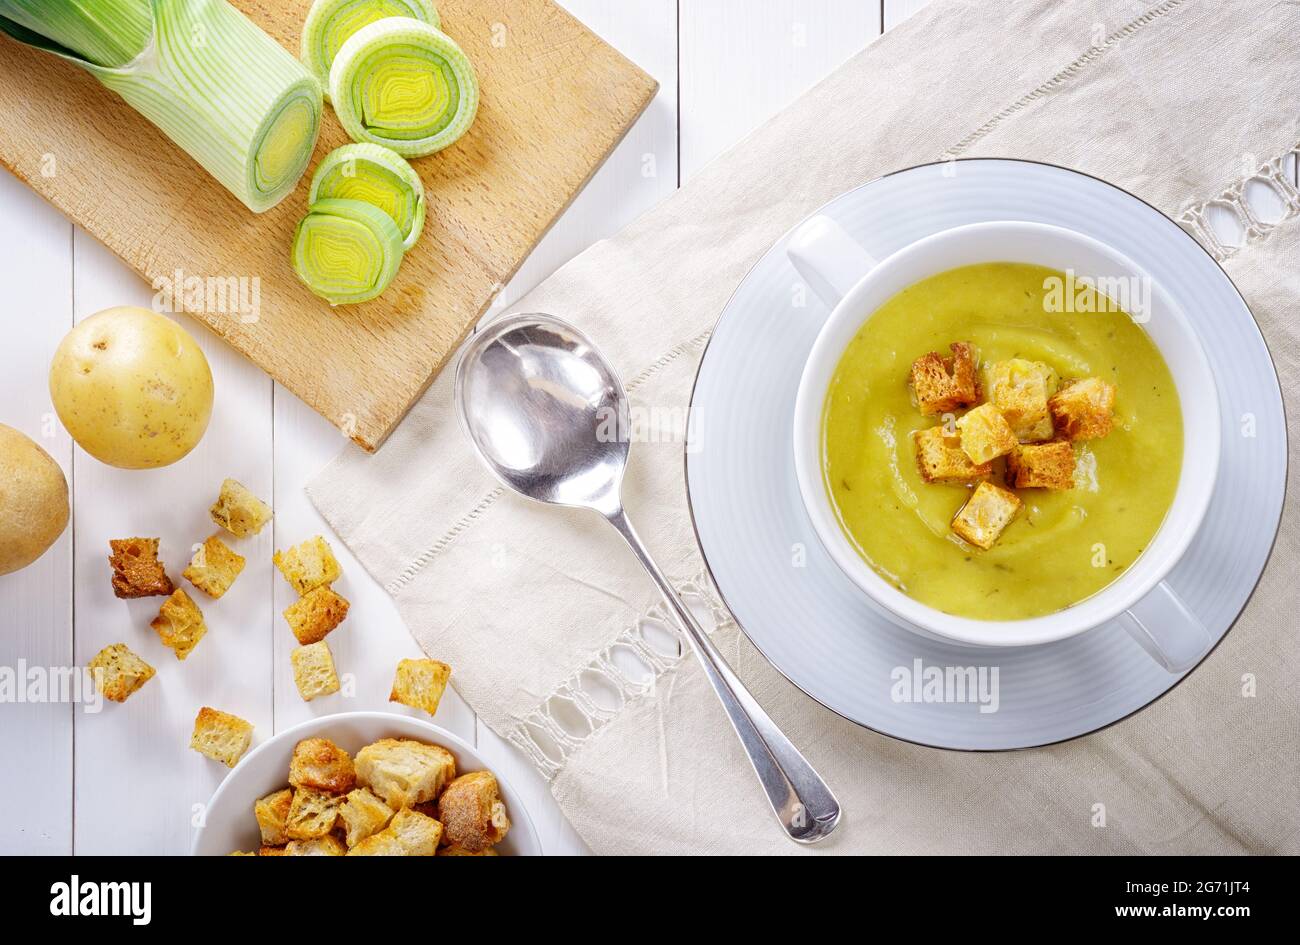 Leek and potato soup with croutons. Tasty and healthy homemade vegetable soup, served on a white wooden table with an embroidered linen tablecloth. To Stock Photo